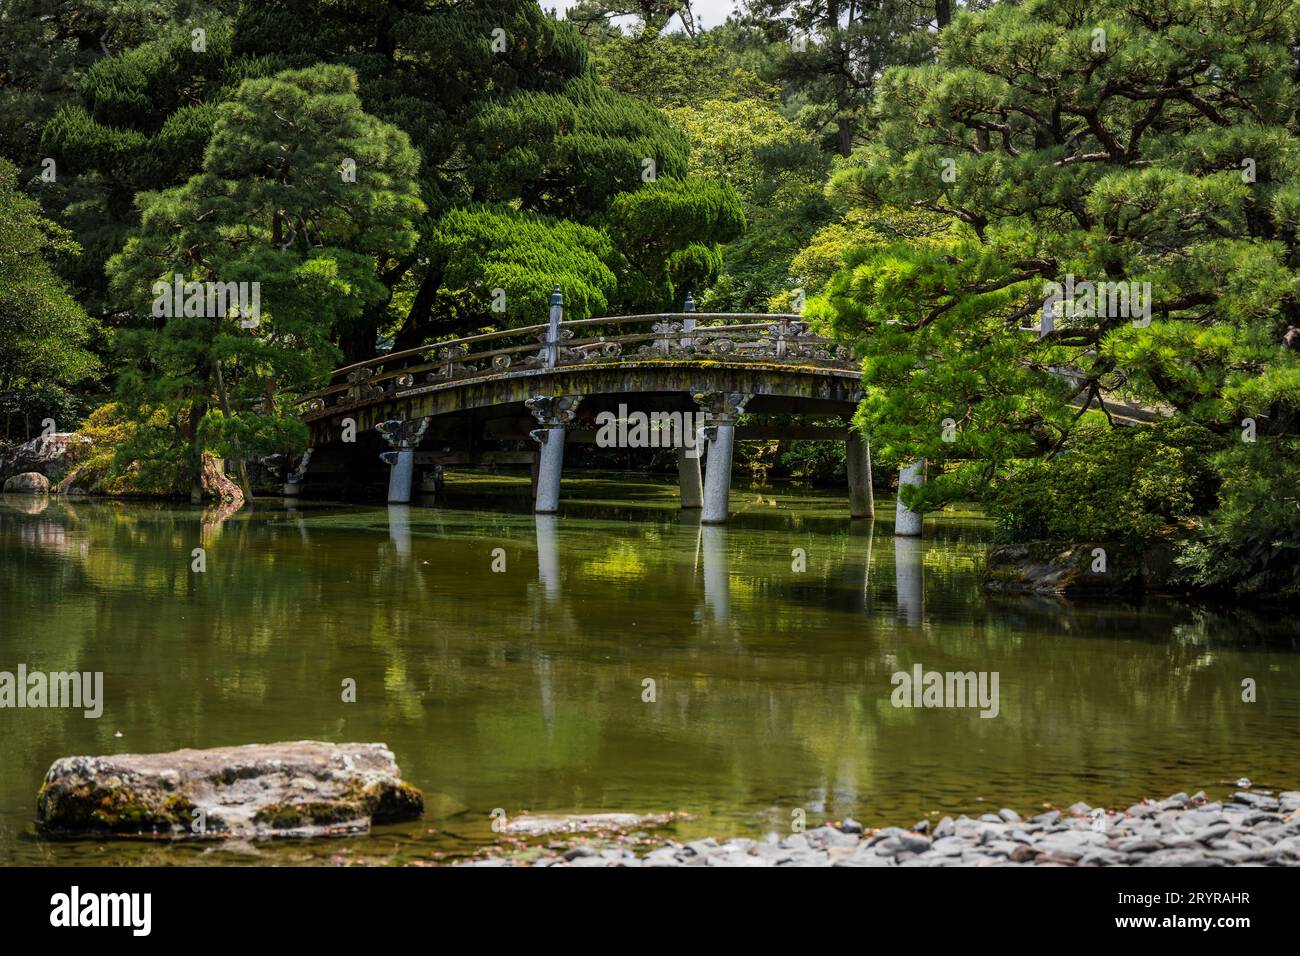 A scenic view of an old bridge that spans across a tranquil lake Stock Photo